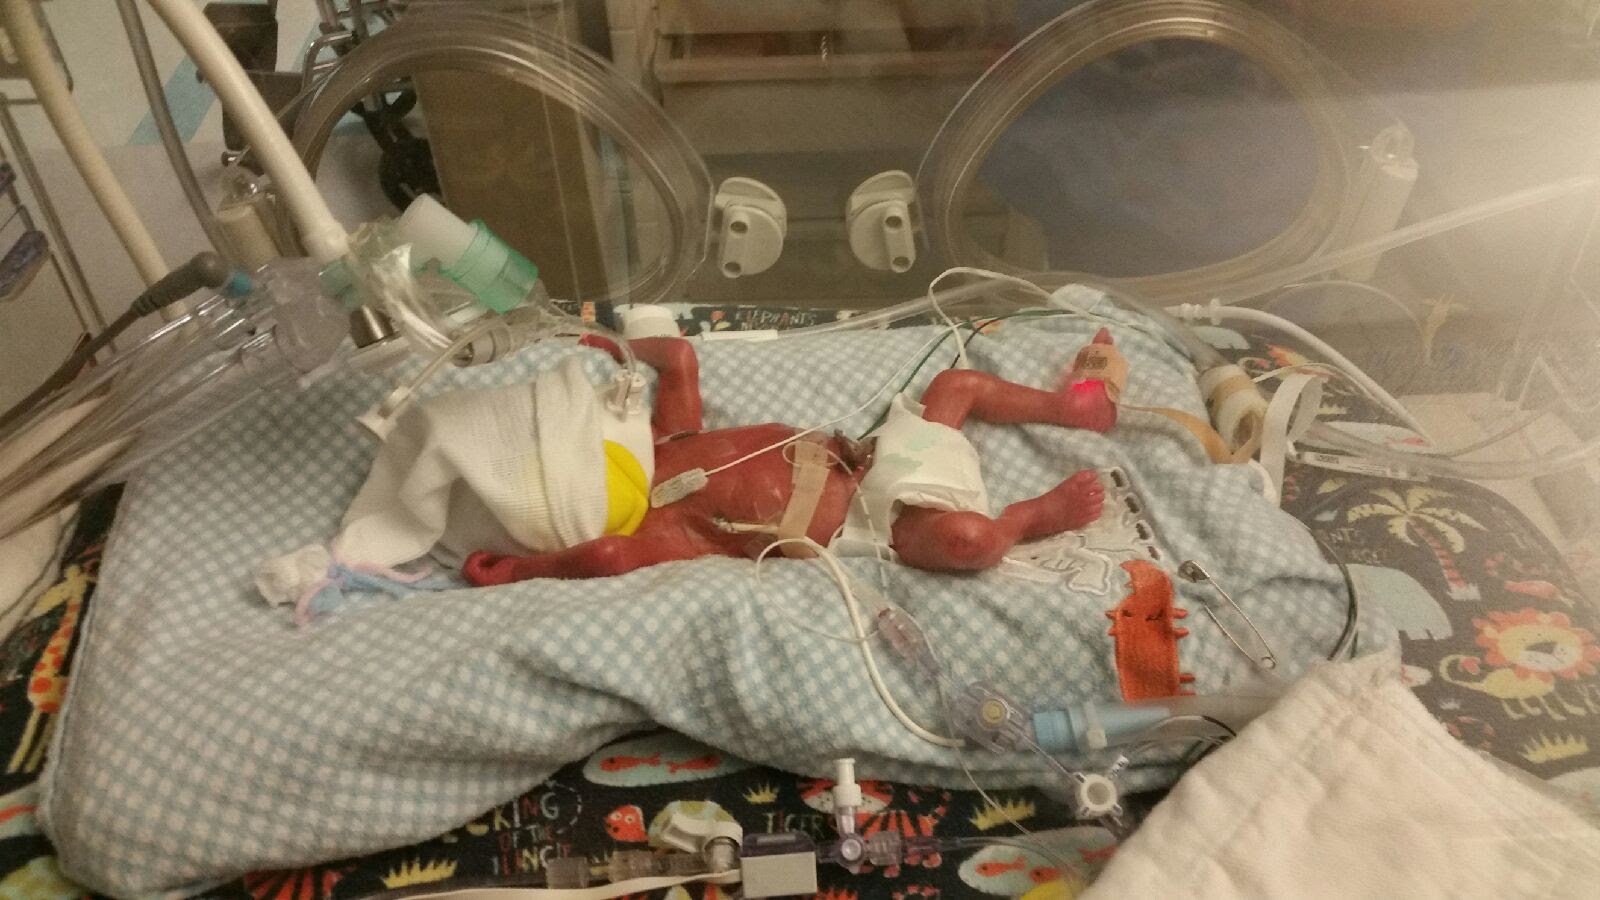 Marshall Keller in the NICU during the first days of his life.